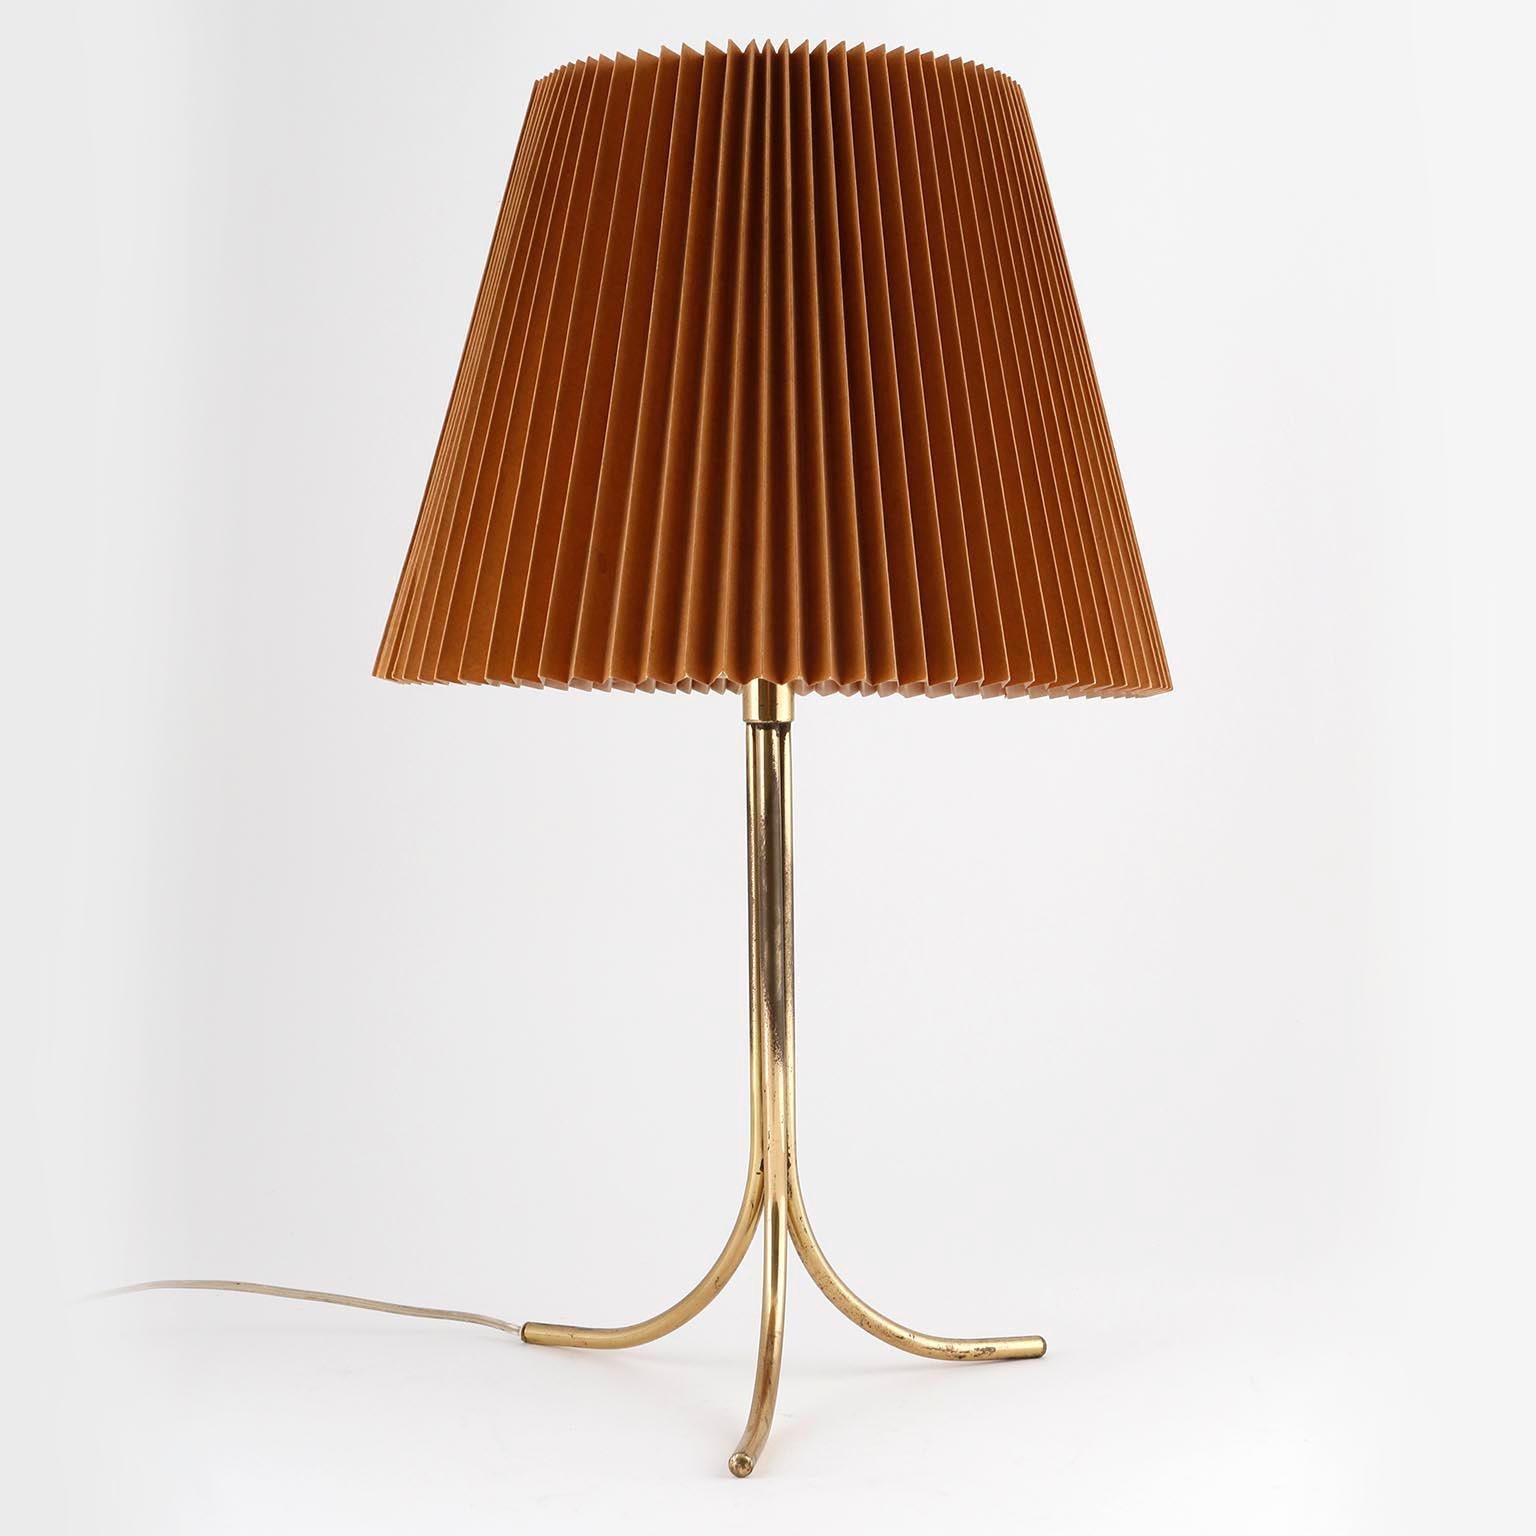 A rare table lamp model 'Dreibein' (engl. 'tripod') no. 1093 by J.T. Kalmar, Vienna, manufactured in midcentury, circa 1960 (late 1950s or 1960s).
The light is documented in the Kalmar catalogue from 1960.
It is made of a solid brass stand and a